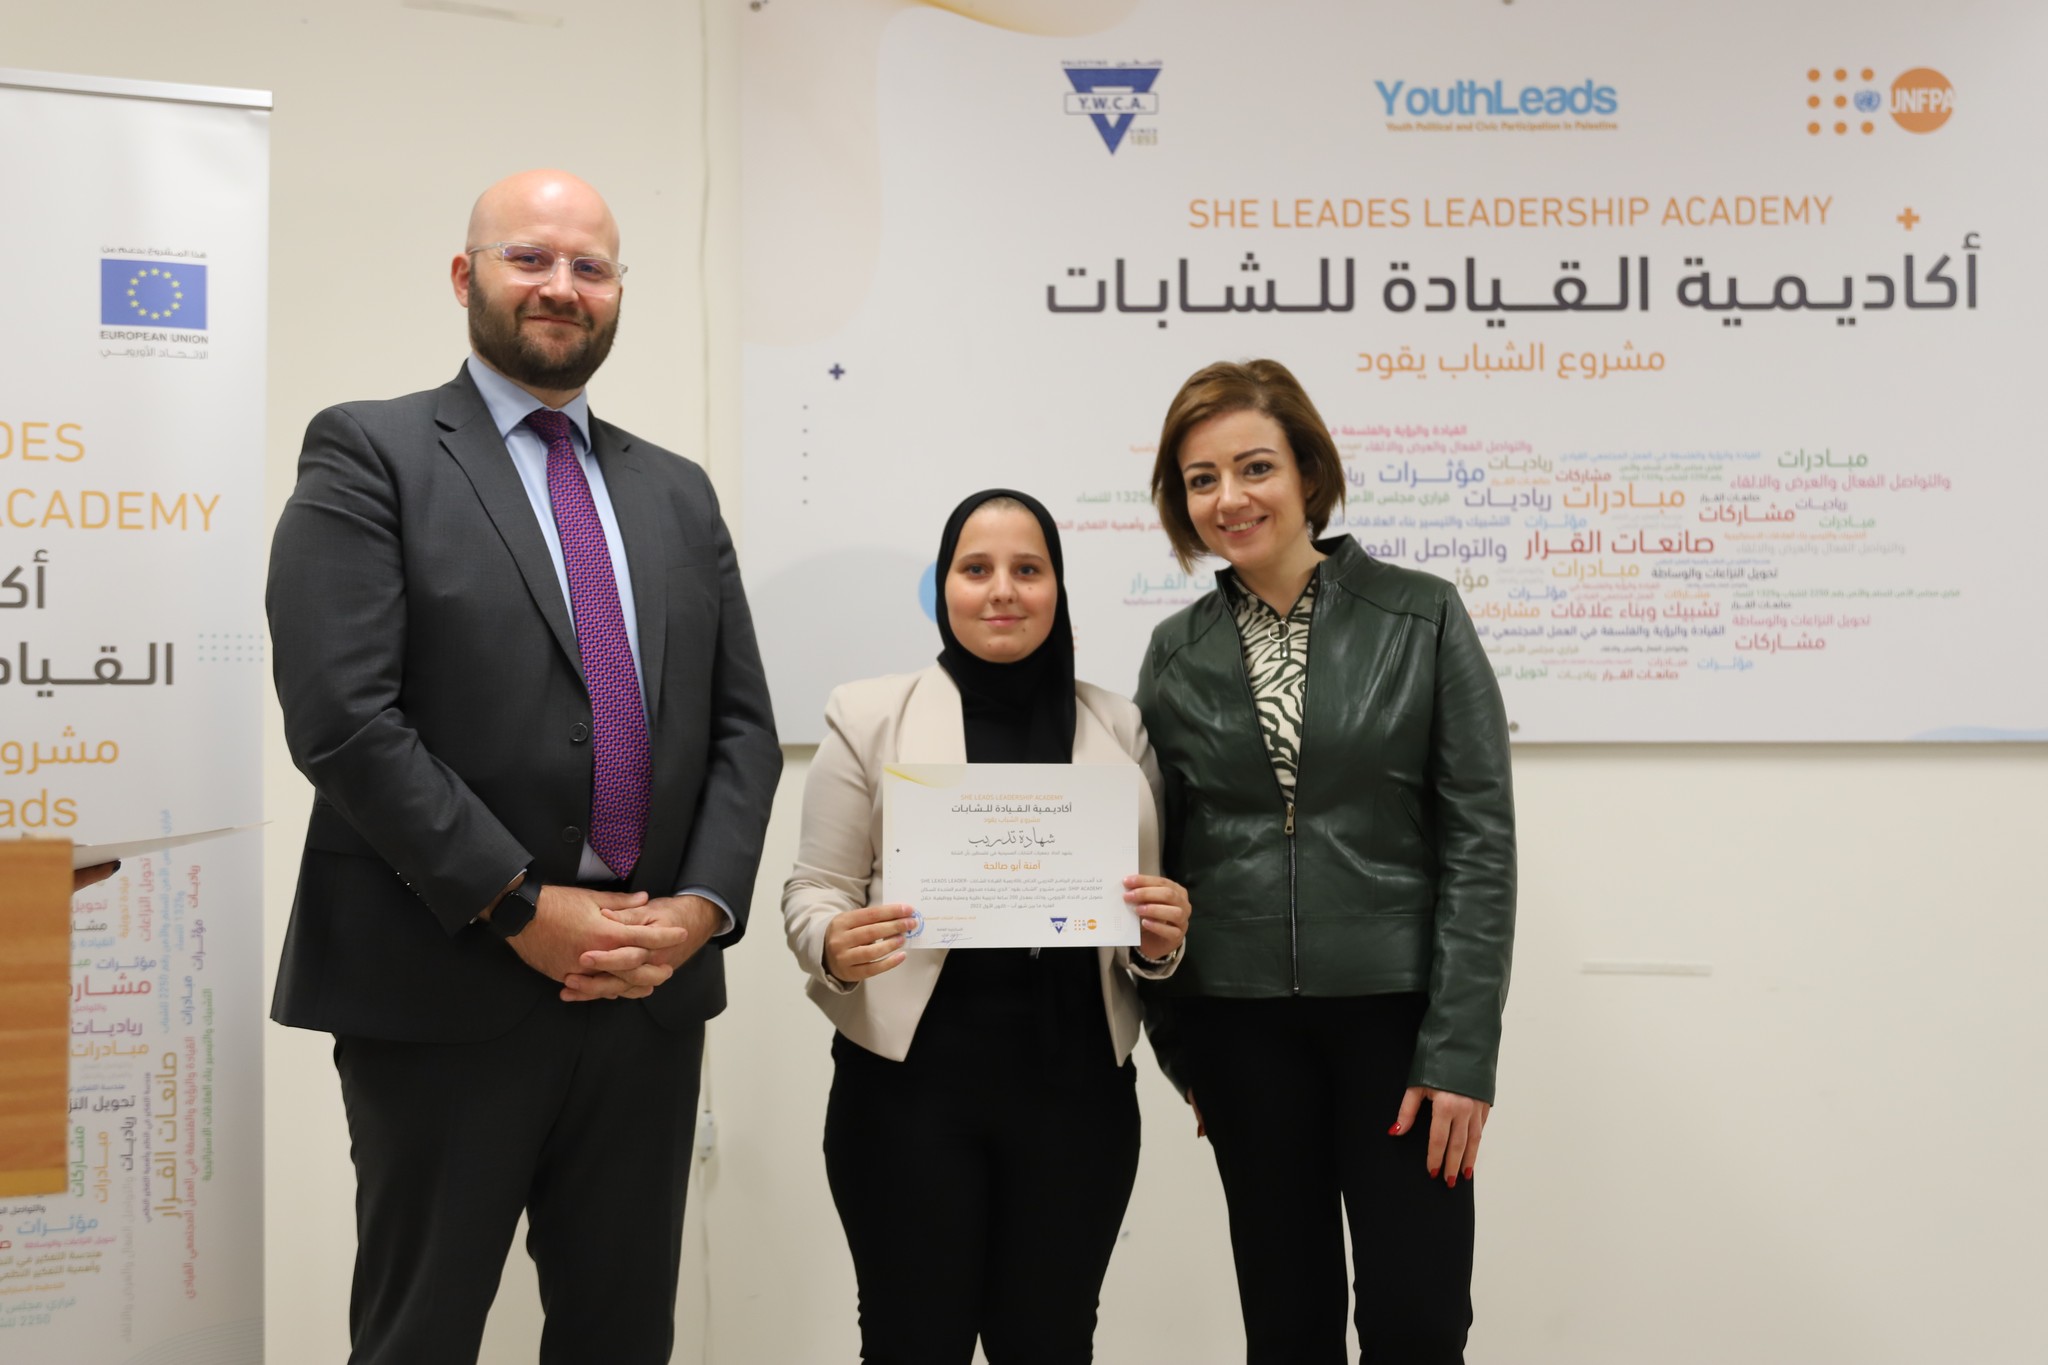 YWCA Palestine Celebrates the graduation of "She Leads" Academy first Cohort